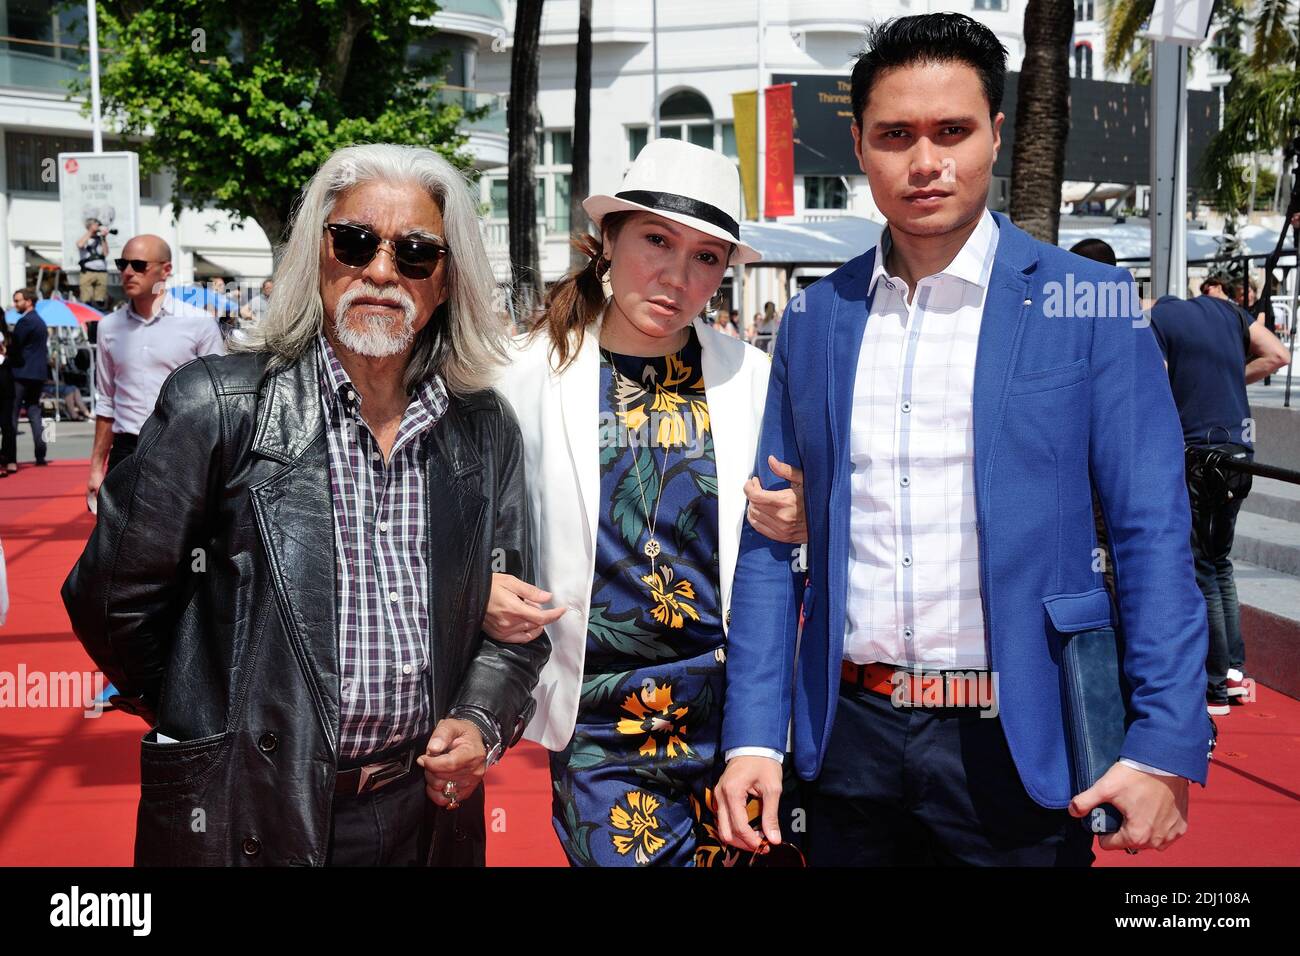 Actors Wan Hanafi Su, Mastura Ahmad and Firdaus Rahman attending the 'Ma'Rosa' screening at the Palais Des Festivals in Cannes, France on May 18, 2016, as part of the 69th Cannes Film Festival. Photo by Aurore Marechal/ABACAPRESS.COM Stock Photo